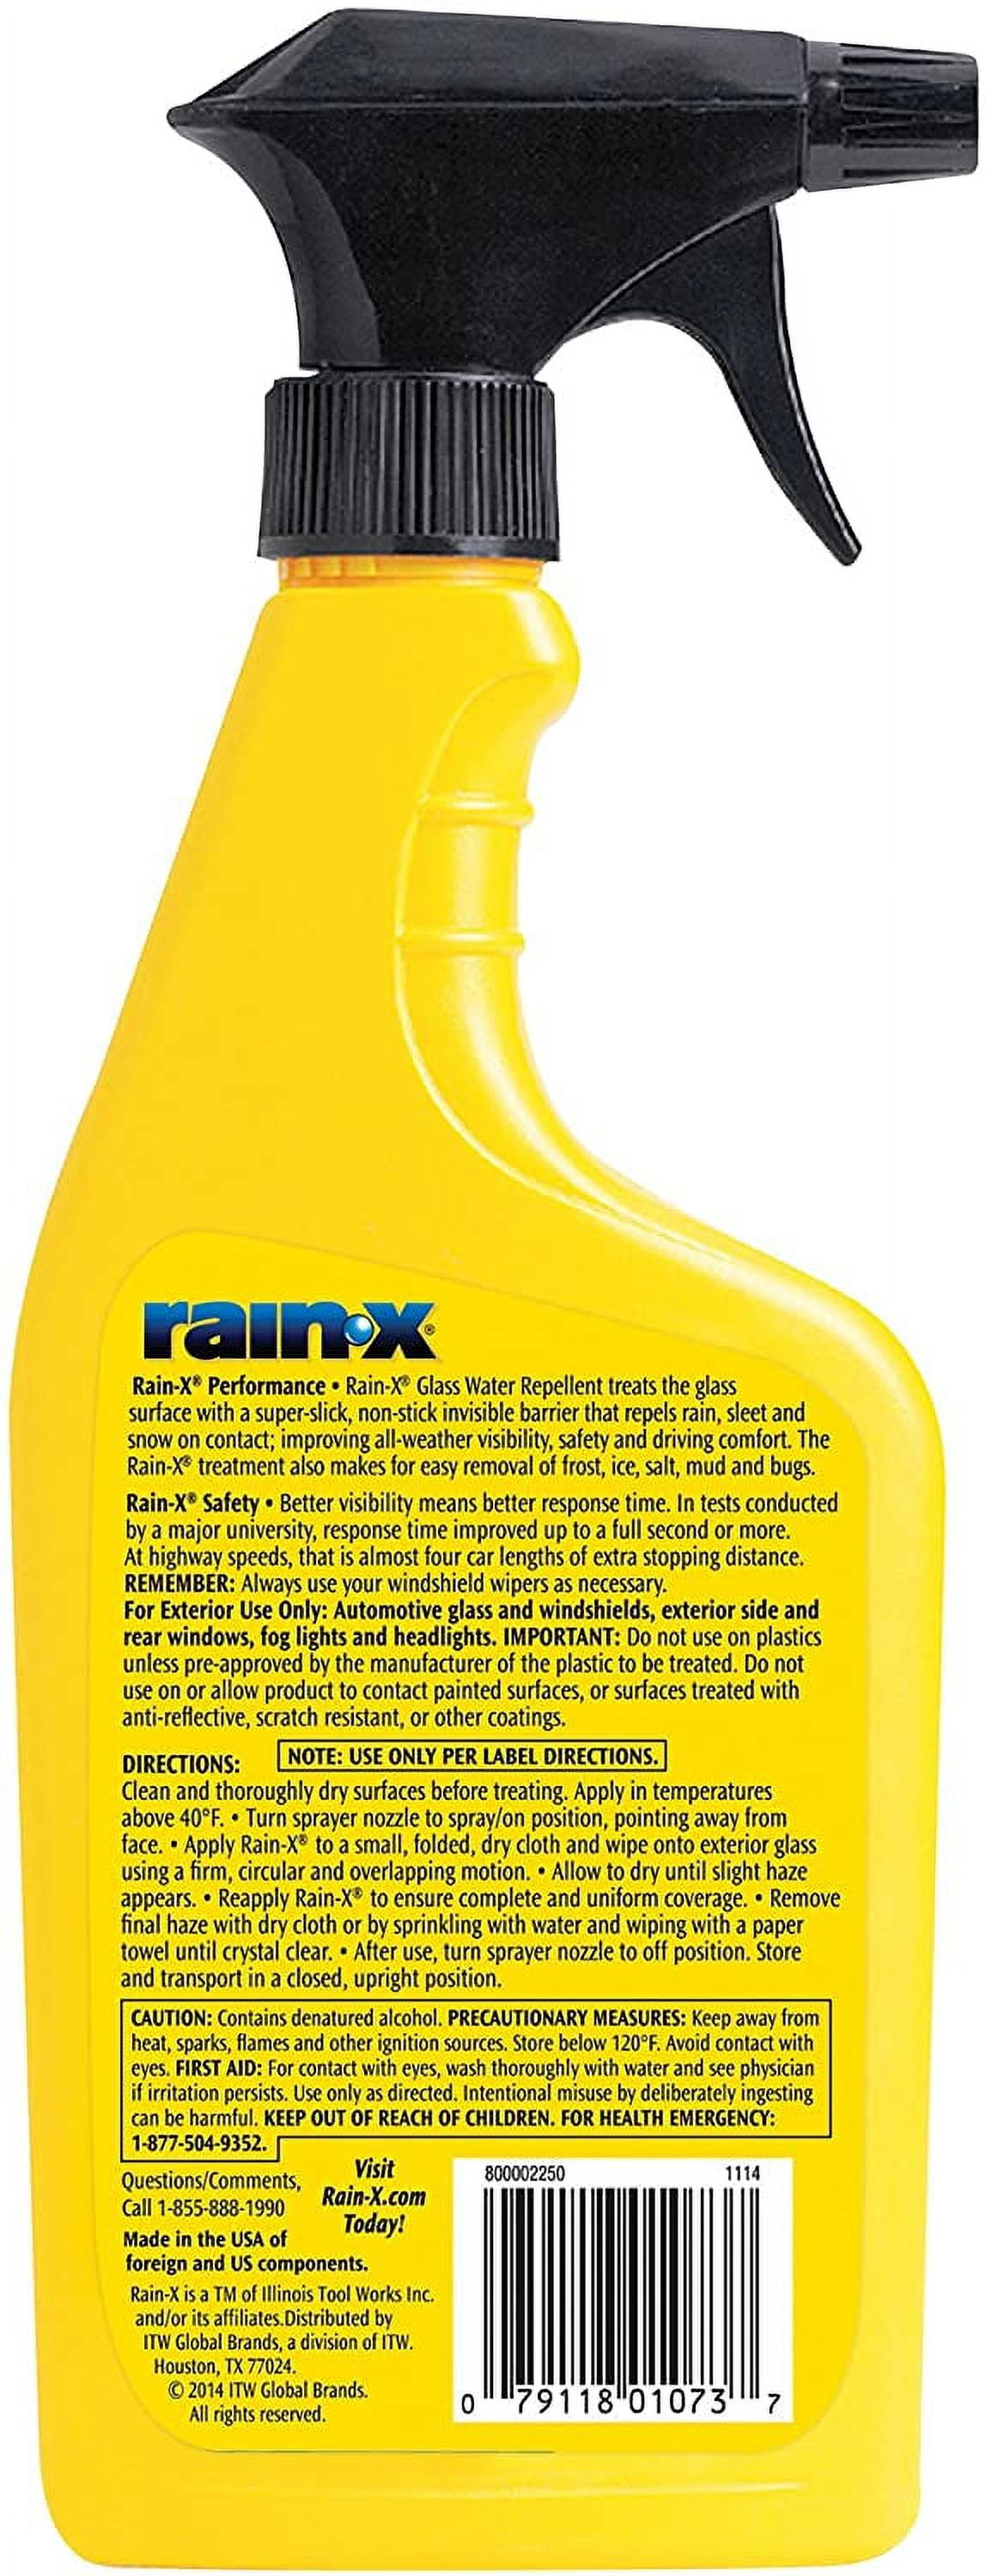 Rain-X Windshield Treatment Glass Water Repellent (Pack of 2)